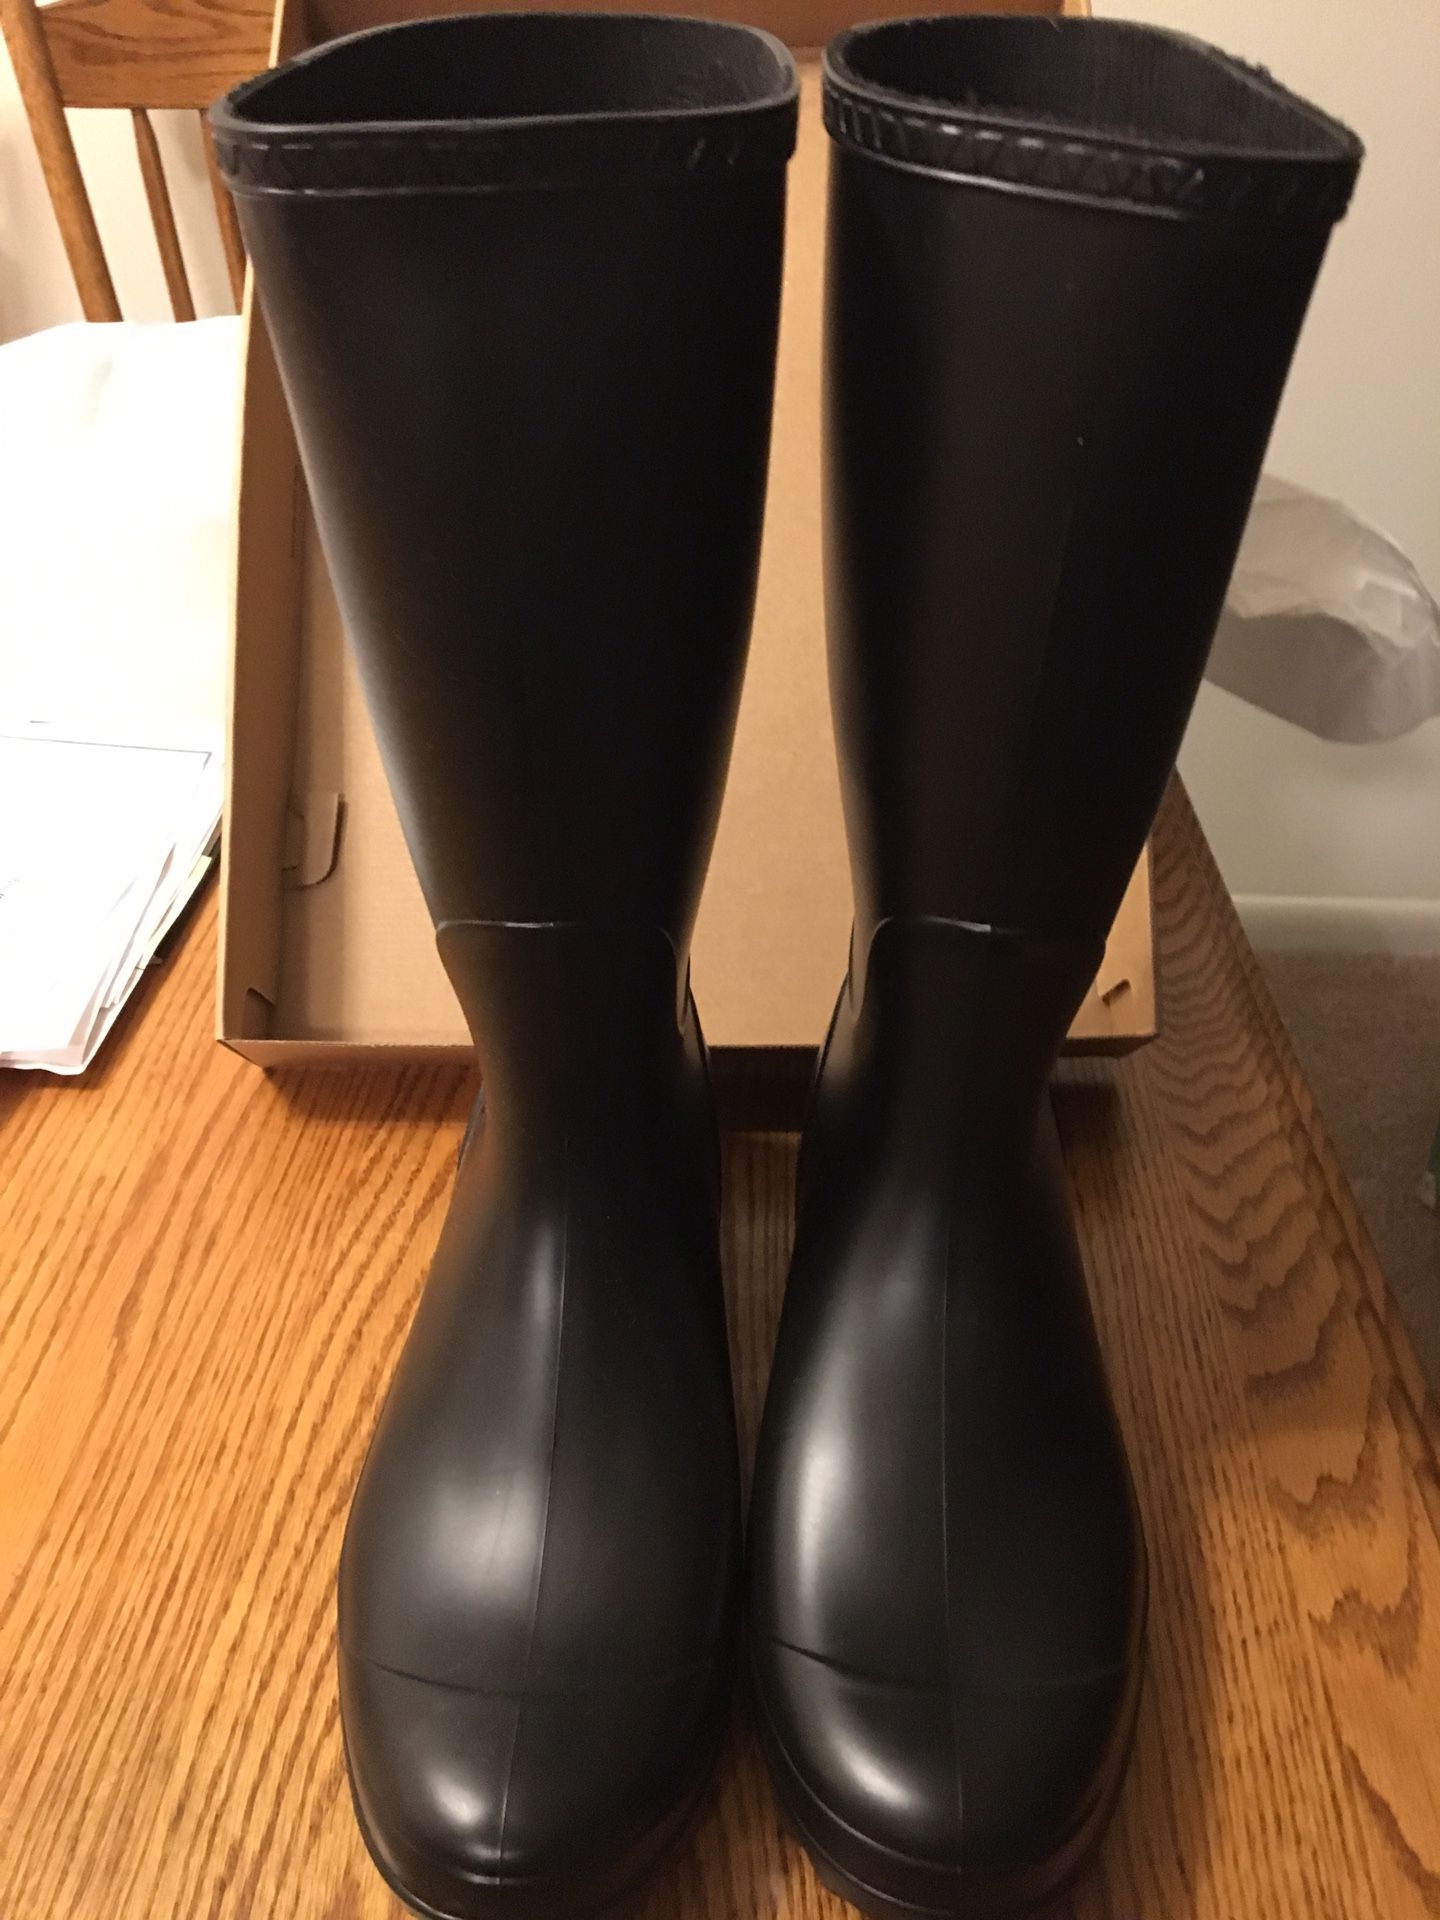 Brand new size 10 women’s UGG rain boot. Check out my other items I have for sale. Pick up in lombard